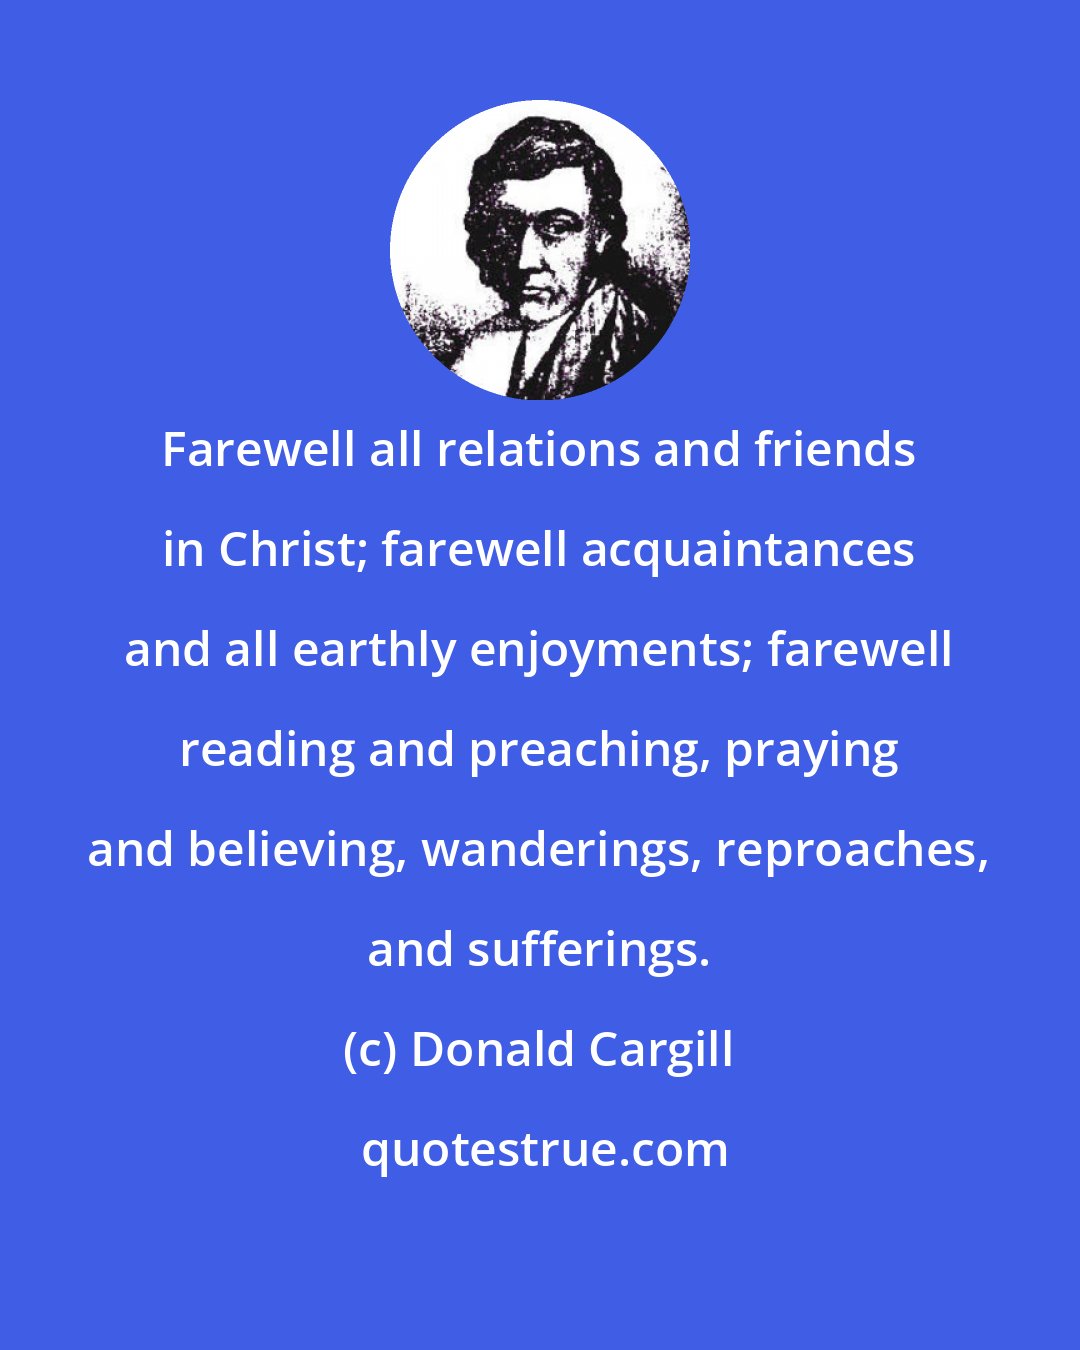 Donald Cargill: Farewell all relations and friends in Christ; farewell acquaintances and all earthly enjoyments; farewell reading and preaching, praying and believing, wanderings, reproaches, and sufferings.